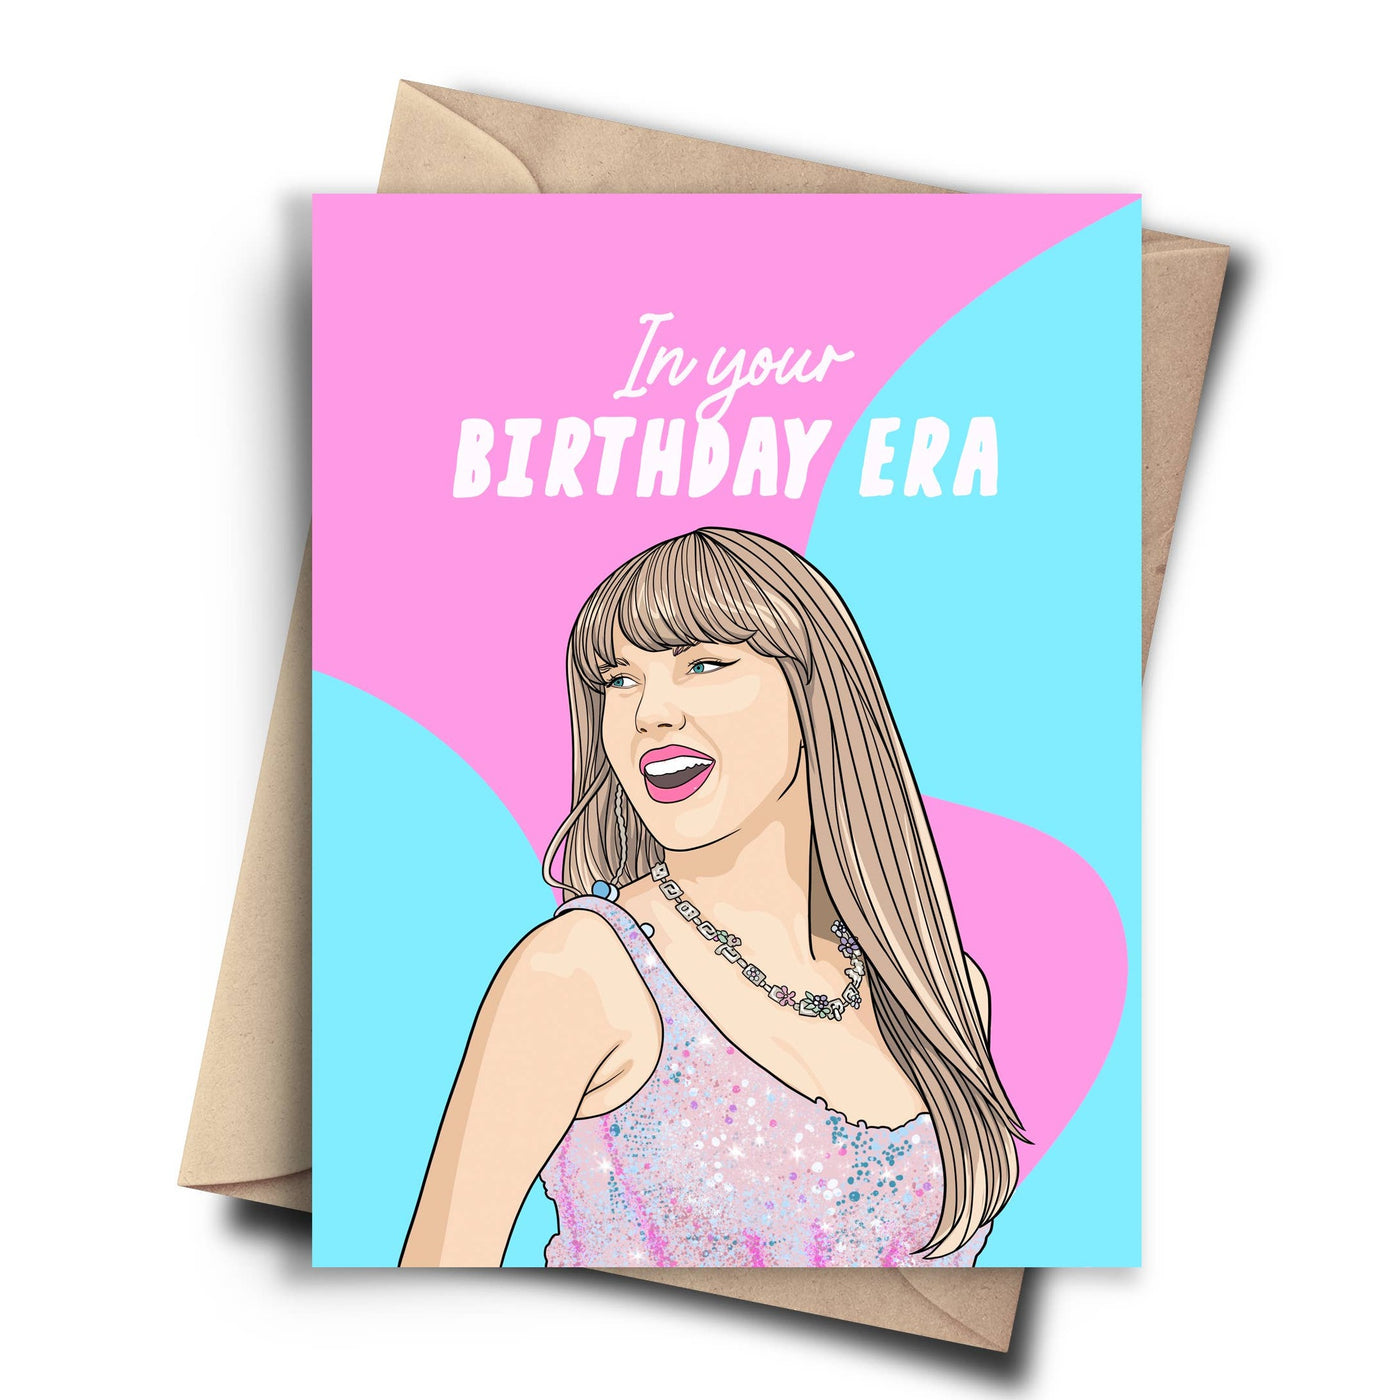 Pop Cult Paper Company | Taylor Swift Birthday Era Greeting Card, The Local Space, Local Canadian Brands 